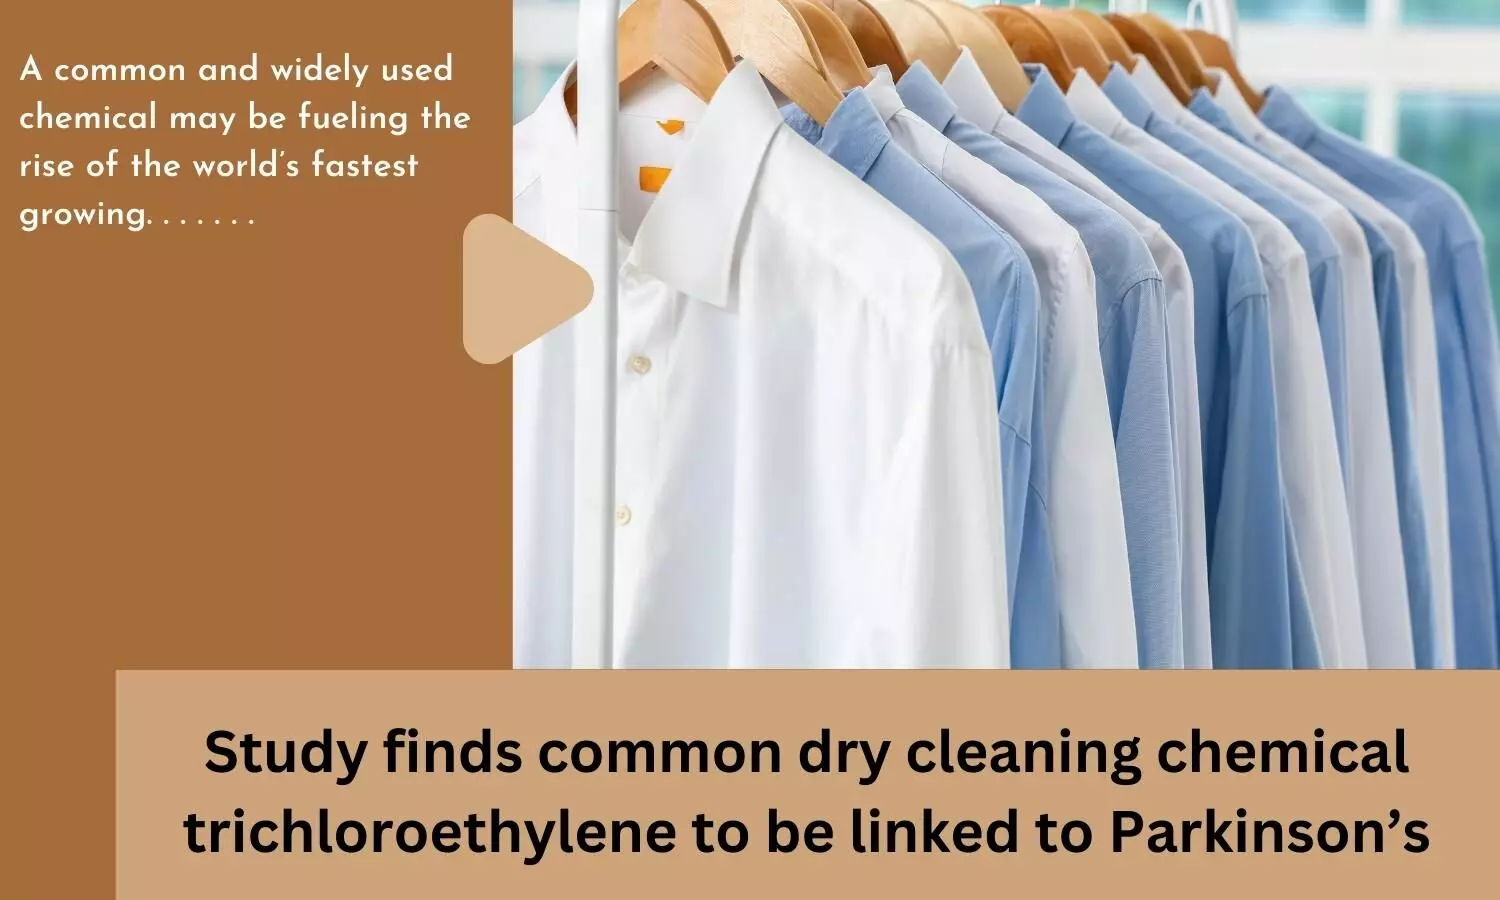 Study finds common dry cleaning chemical trichloroethylene to be linked to Parkinsons